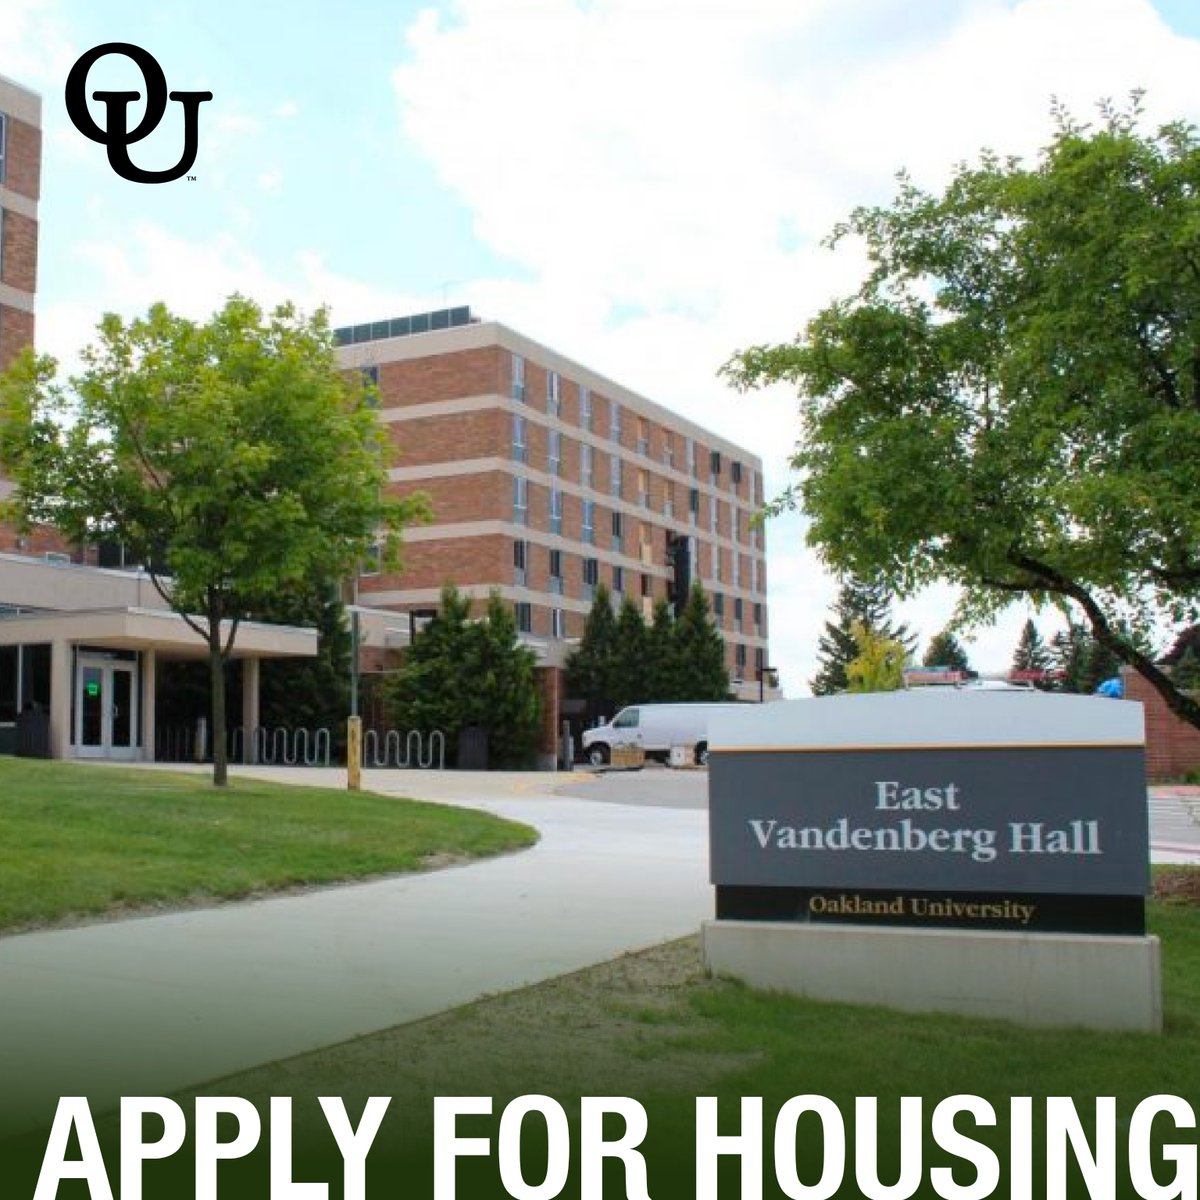 Independence and experience are a large part of OU housing’s appeal, but the benefits run deeper than that. Join the community and apply to live on campus at oakland.edu/housing/apply/